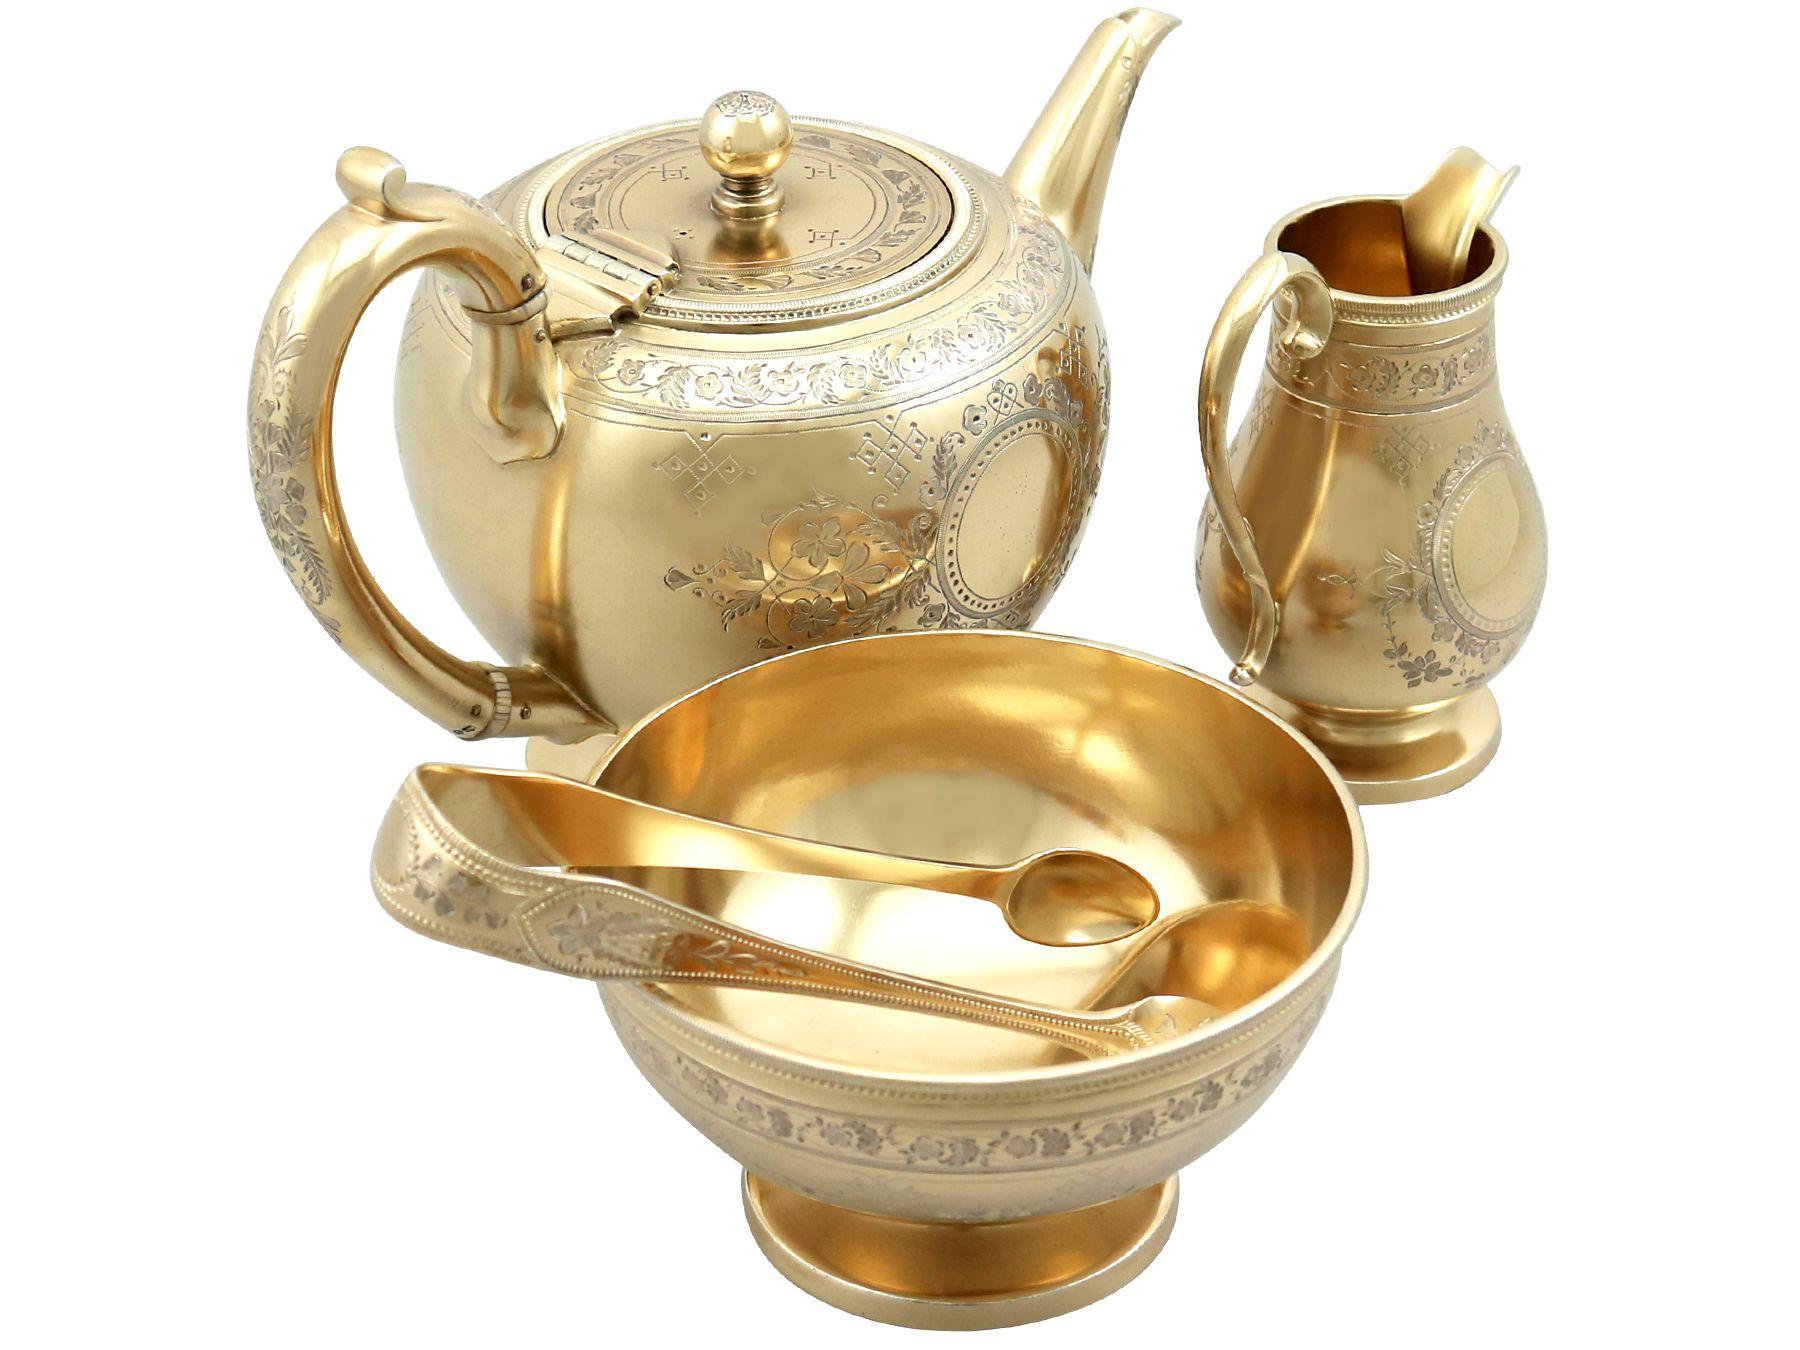 An exceptional, fine and impressive antique Victorian English sterling silver gilt three piece bachelor tea set/service; an addition to our diverse silver teaware collection

This exceptional antique Victorian sterling silver gilt three piece